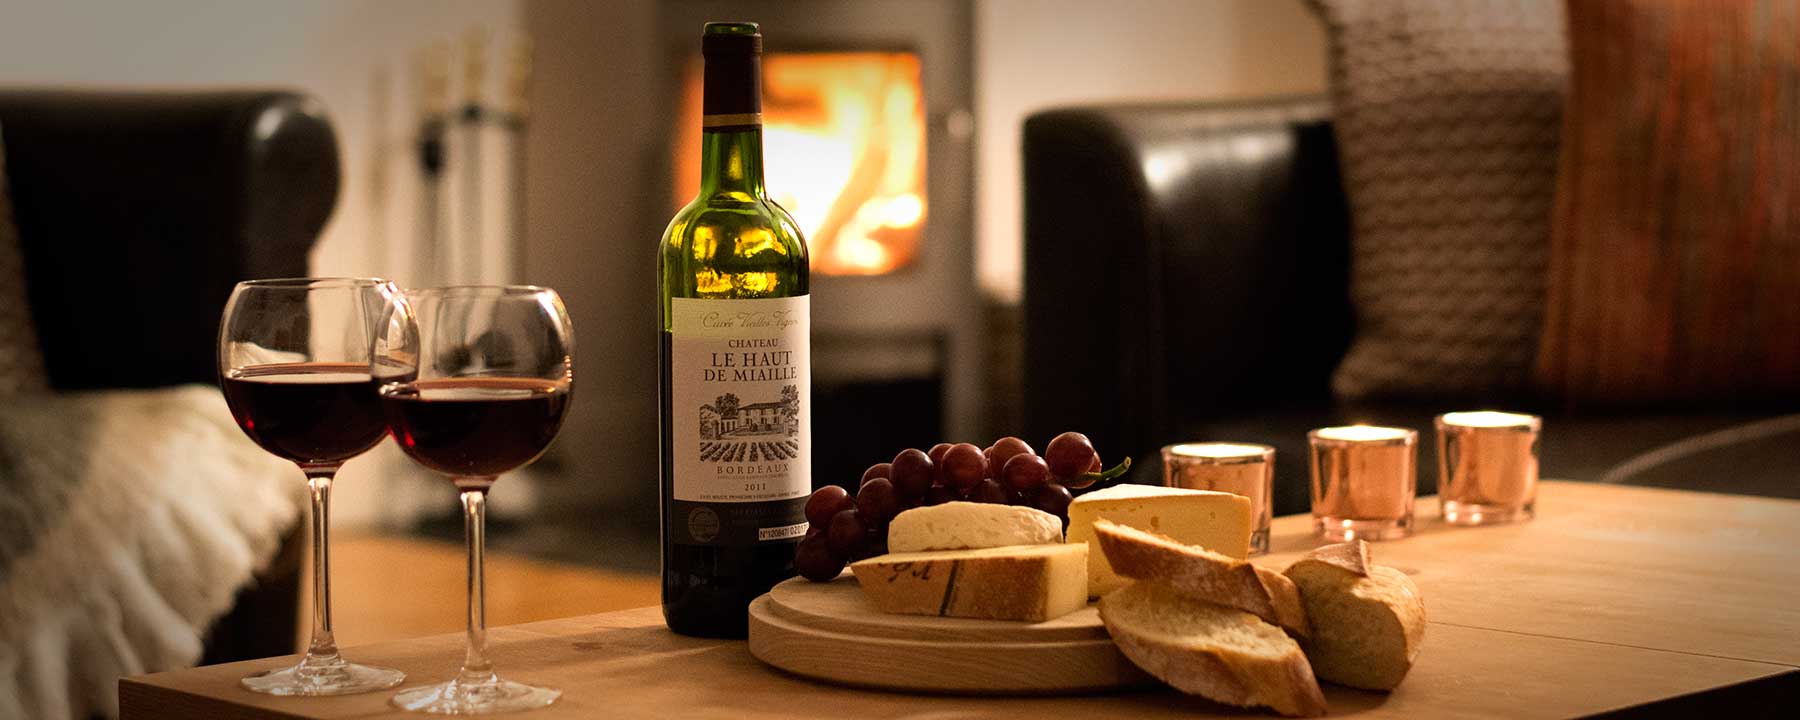 Enjoy some of Savoie's finest cheeses with our hand-picked wine list